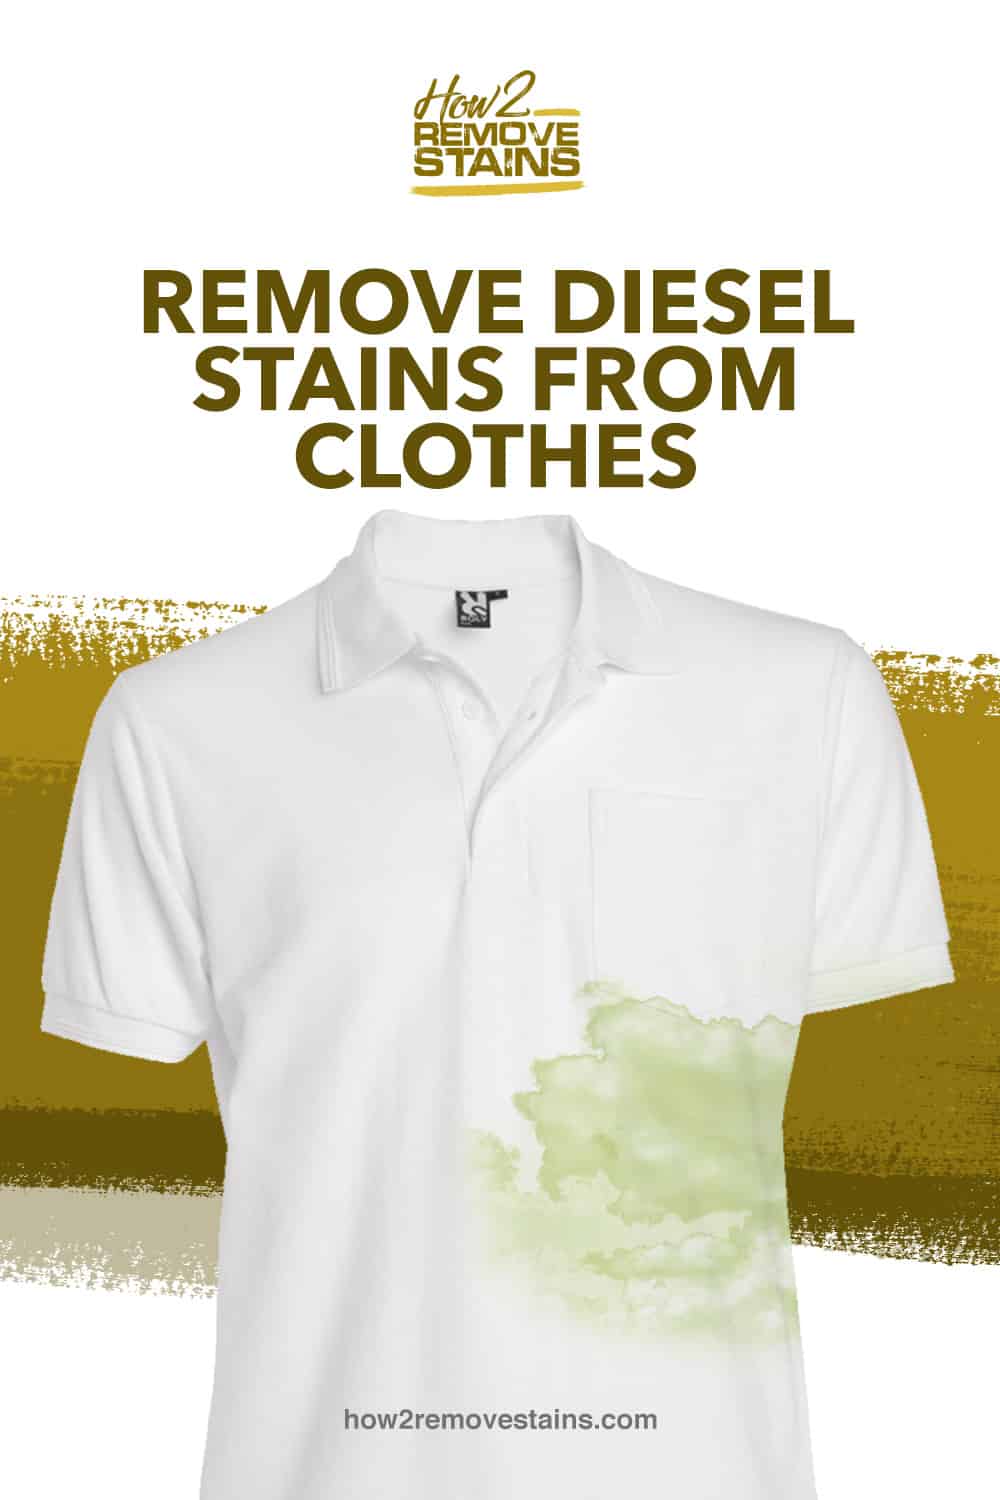 How to remove diesel stains from clothes [ Detailed Answer ]